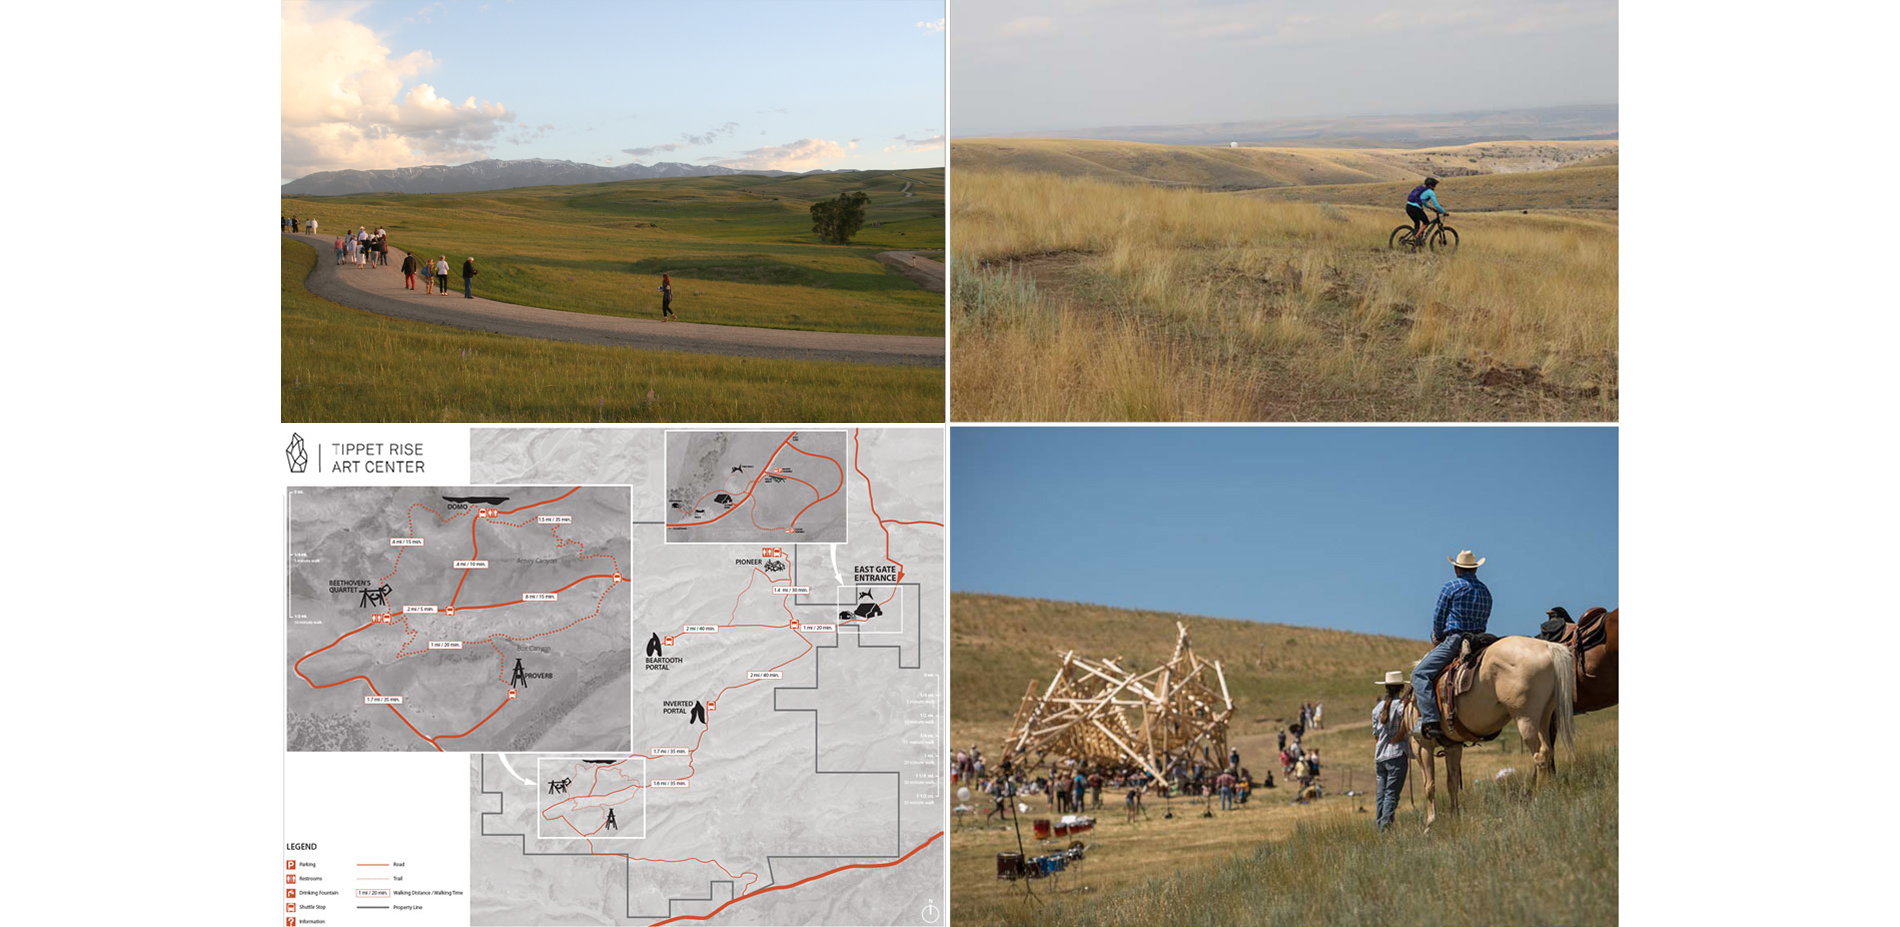 The distance between sculptures at Tippet Rise’s is measured in miles. In addition to an overall circulatory system, the landscape architect developed…